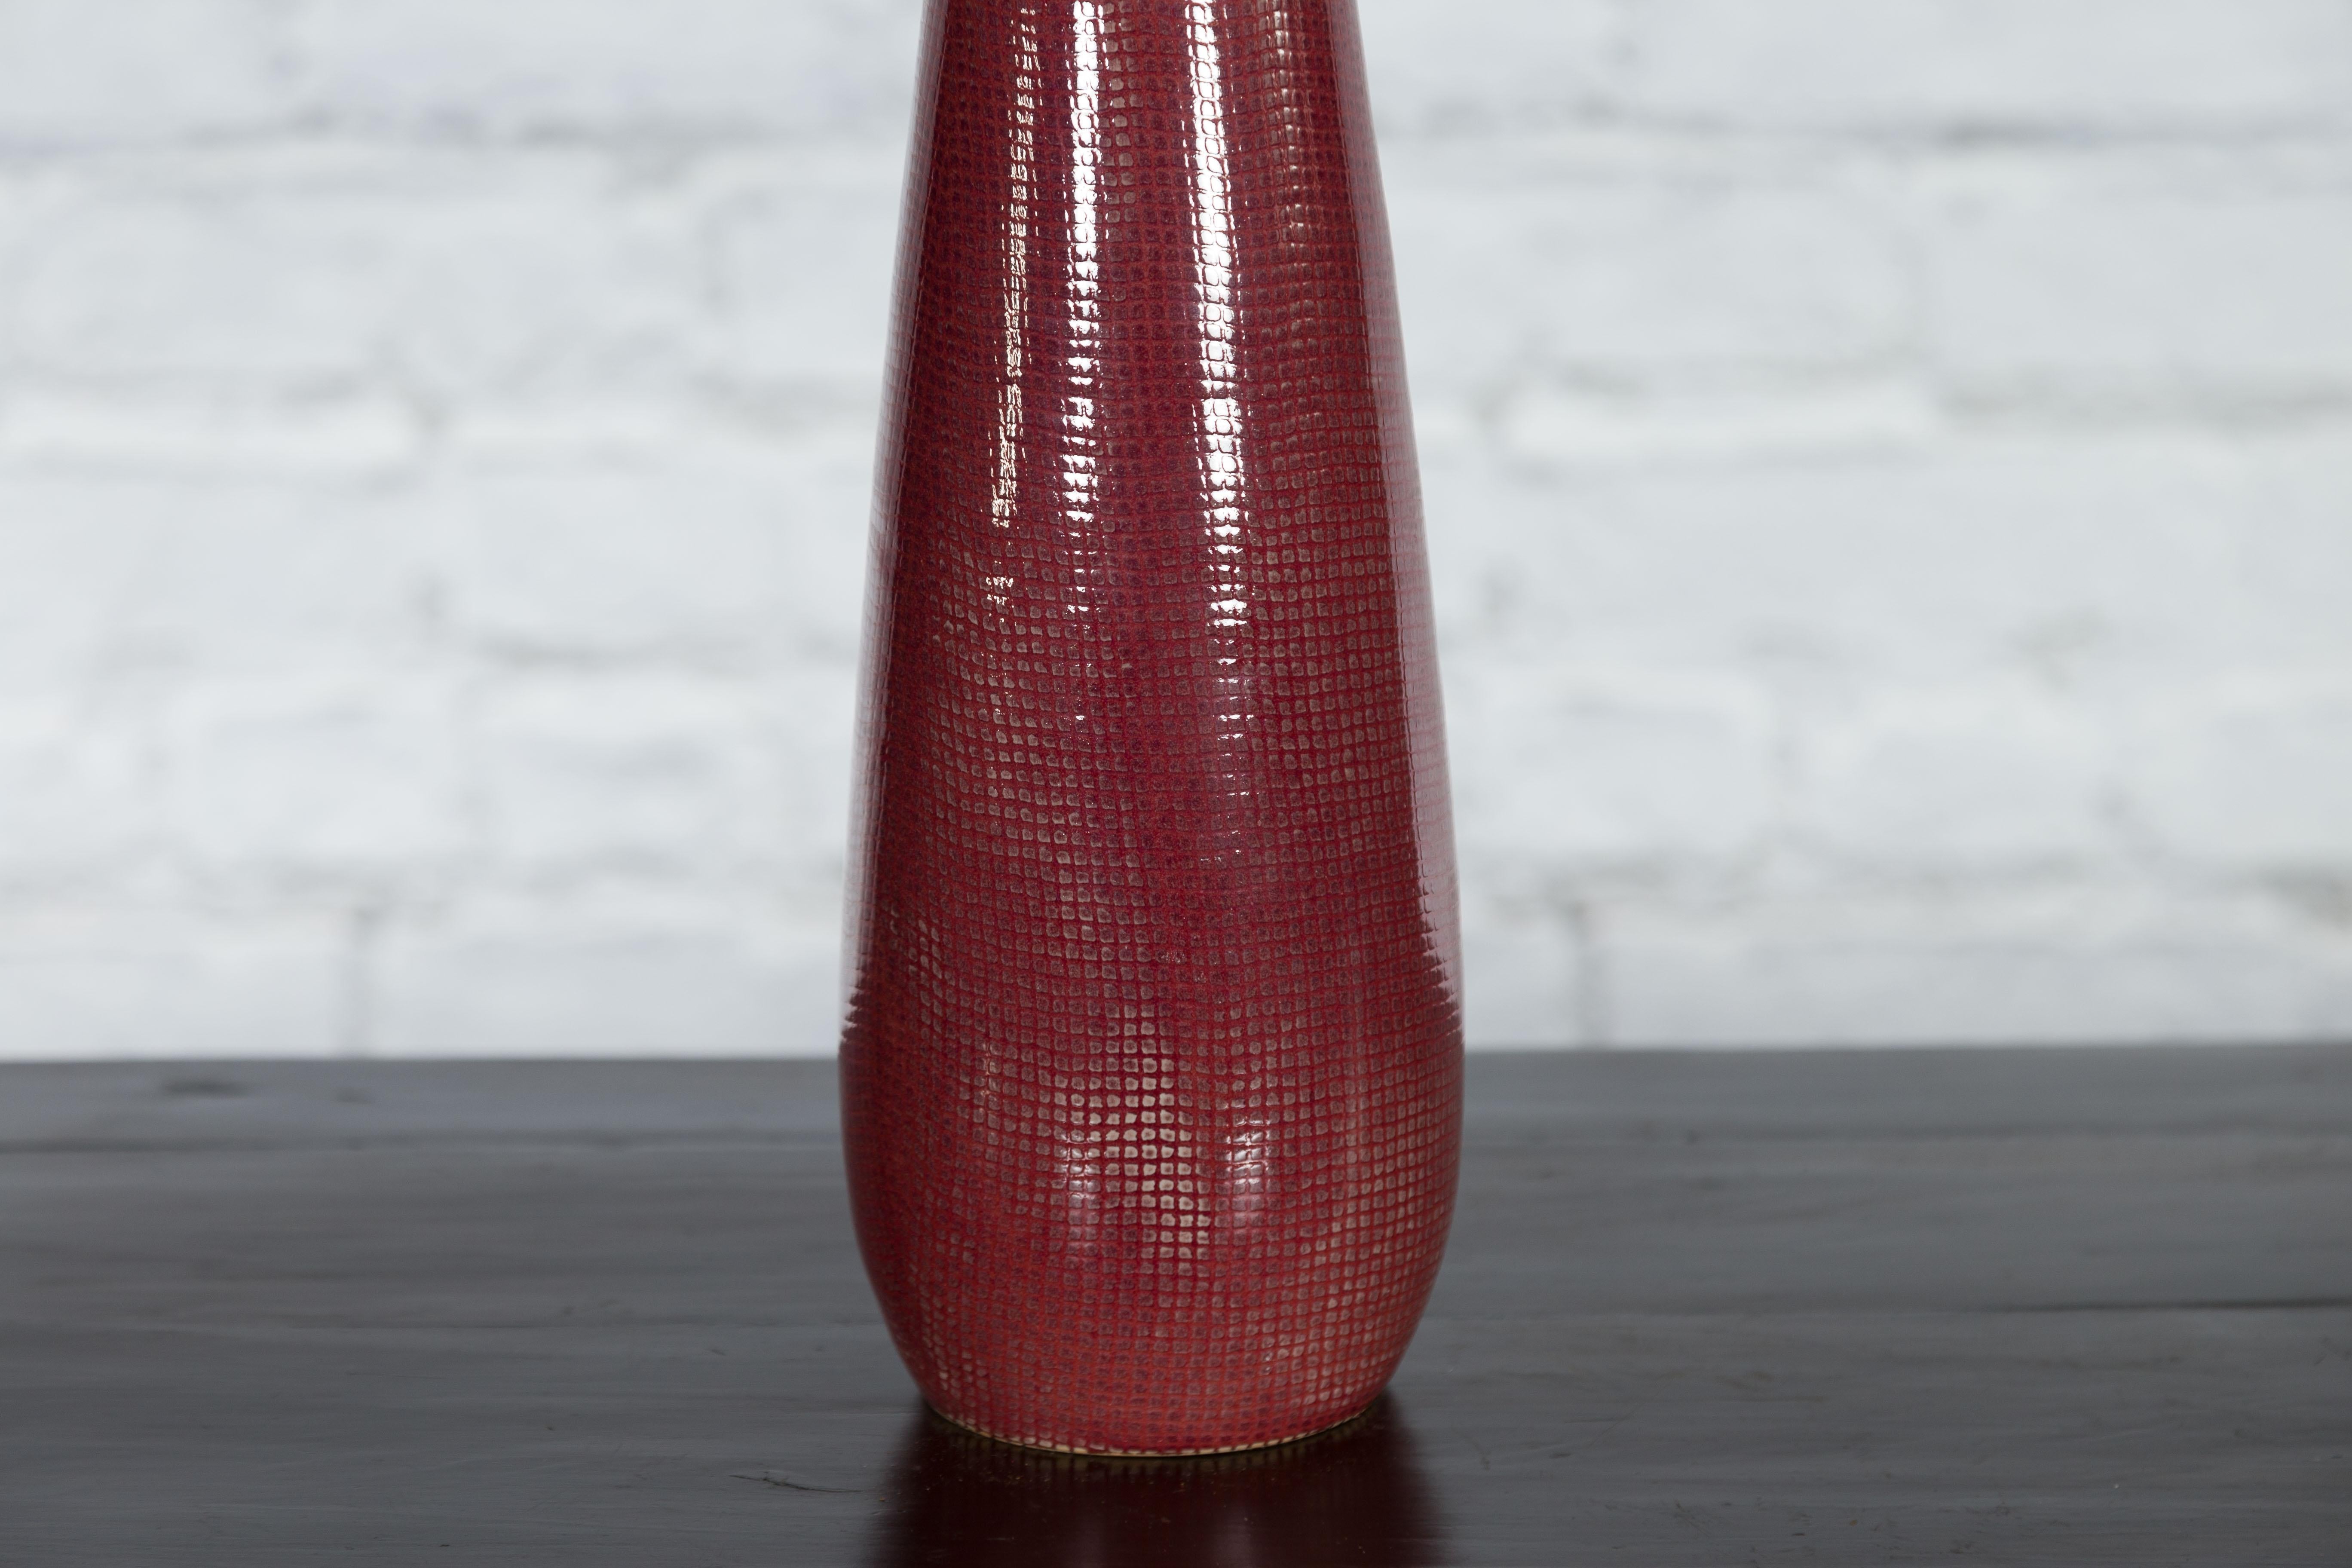 Ceramic Artisan Made Prem Collection Bottle Shaped Vase with Grid Style Textured Motifs For Sale